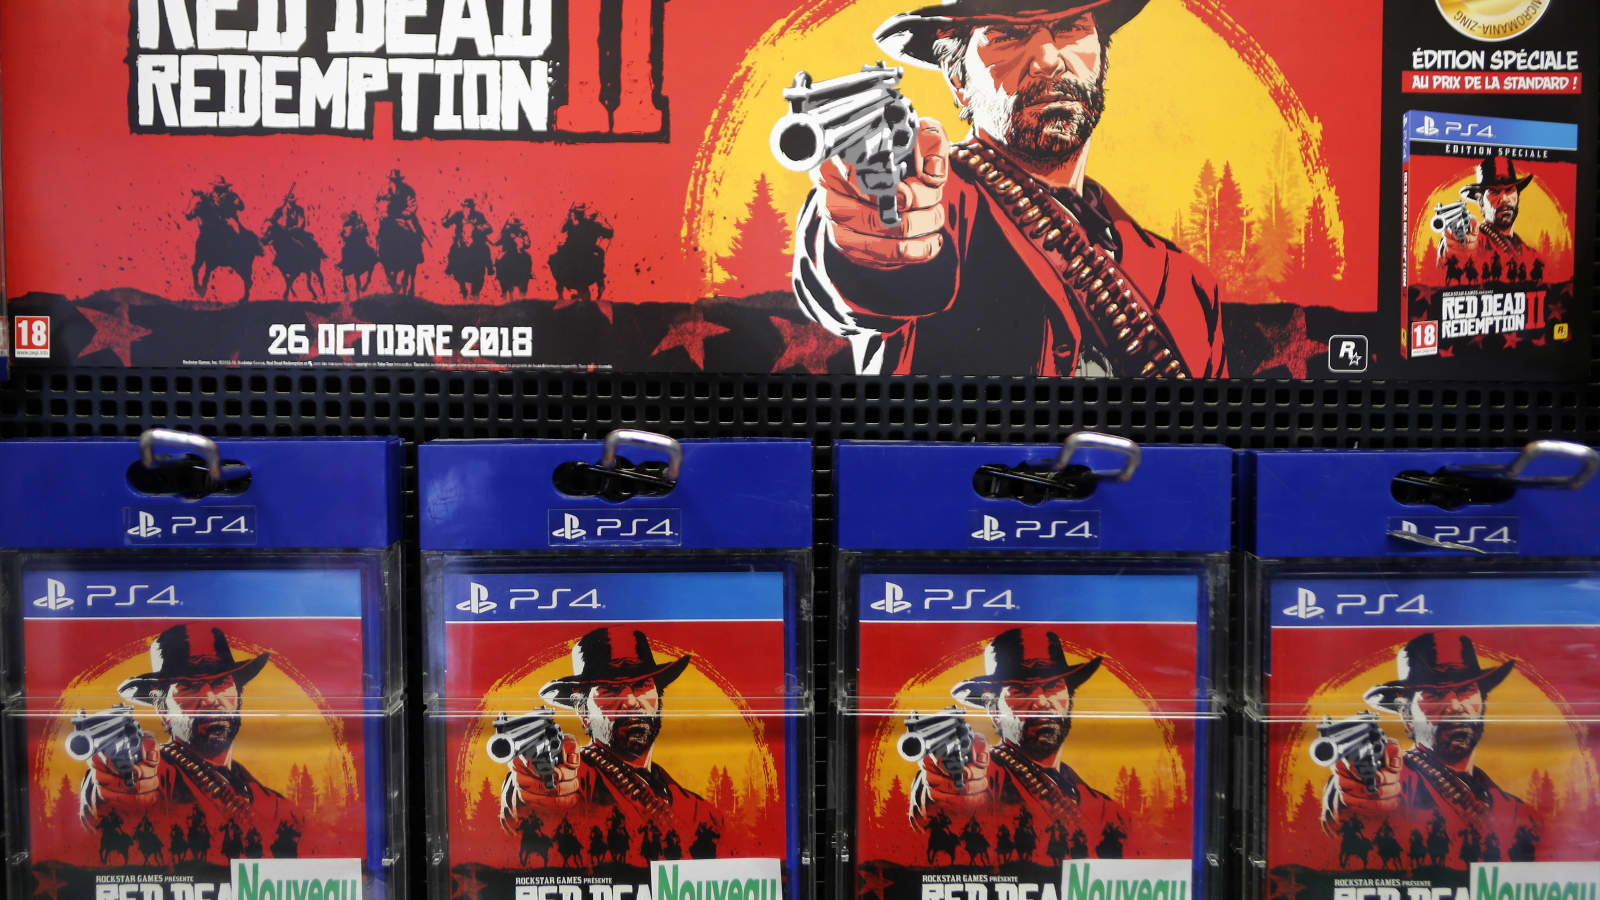 Proposal Recite militia Rockstar's Red Dead Redemption 2 smashes opening weekend records